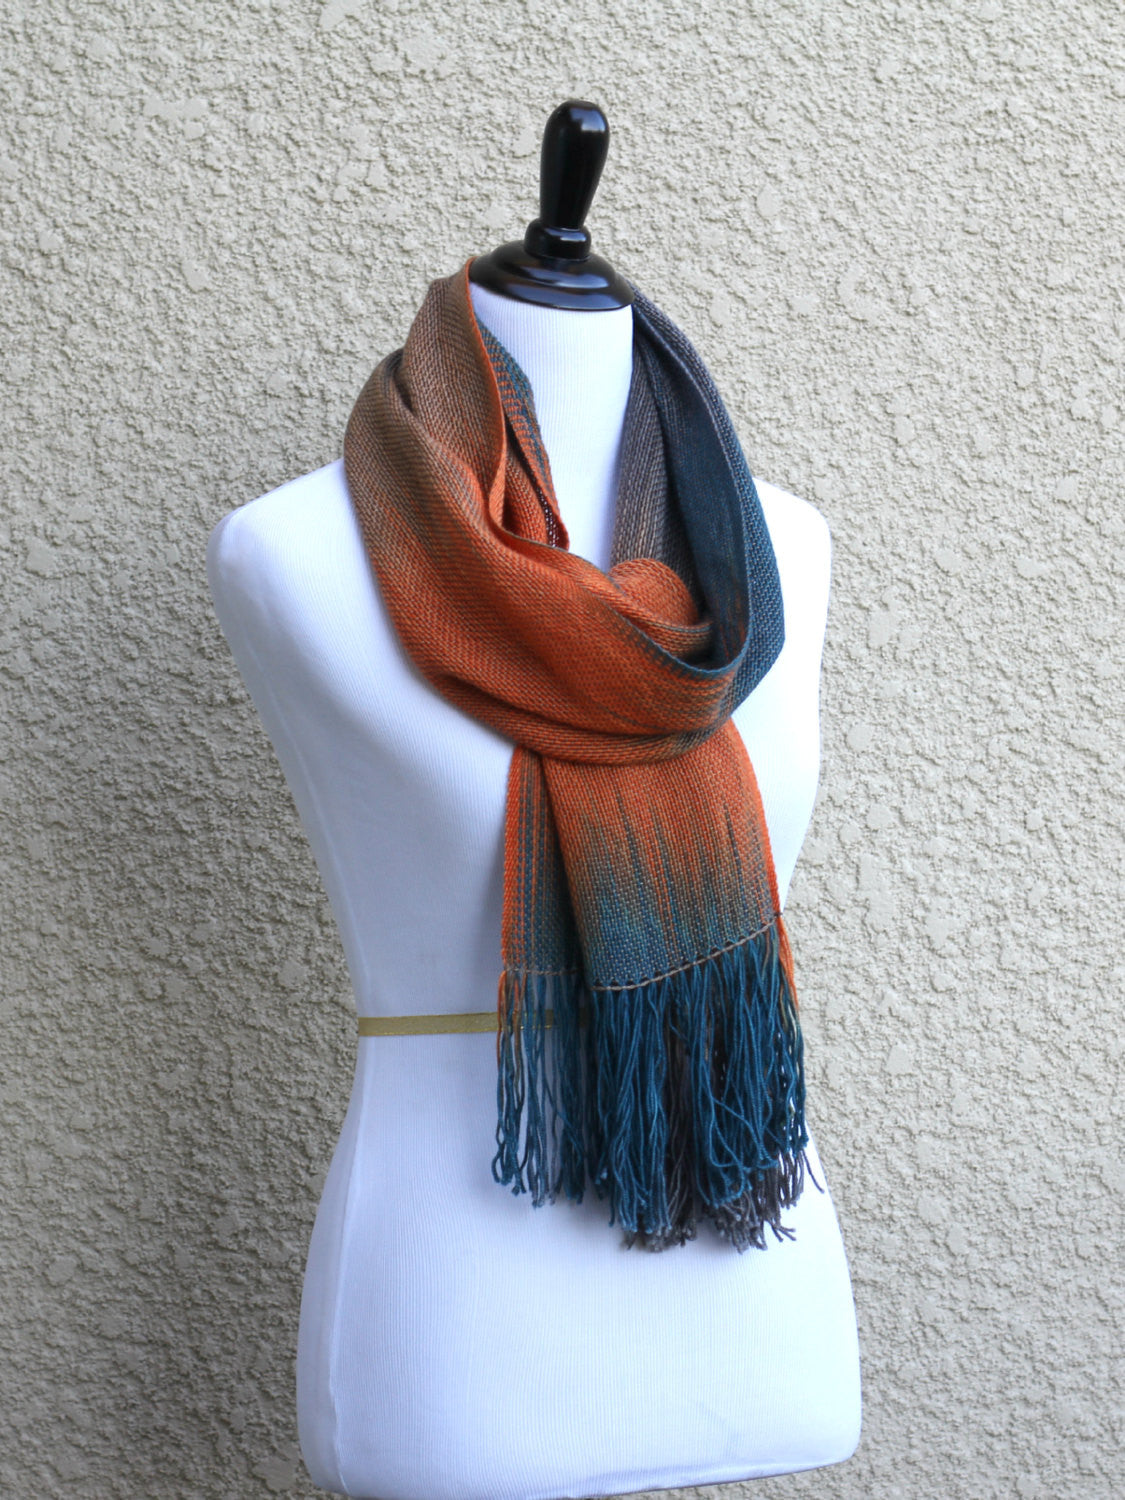 Woven scarf in teal, orange and beige colors, gift or her